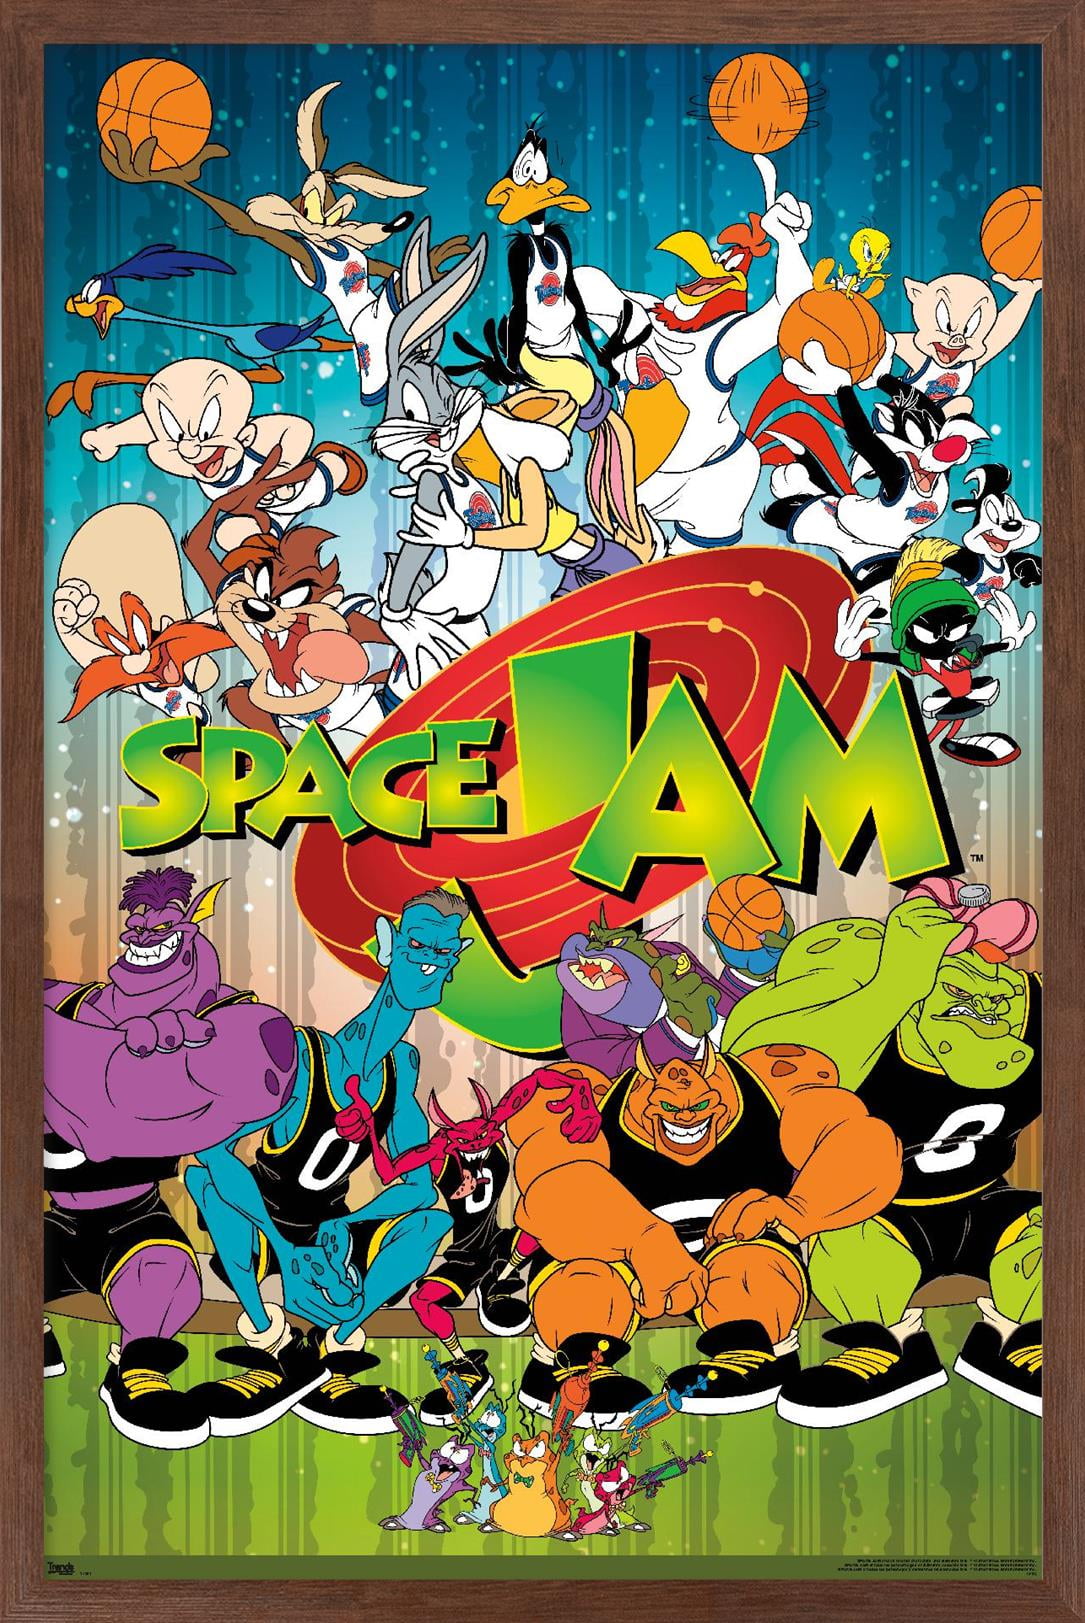 Looney Tunes: Space Jam - Classic Wall Poster, 22.375 x 34, Framed